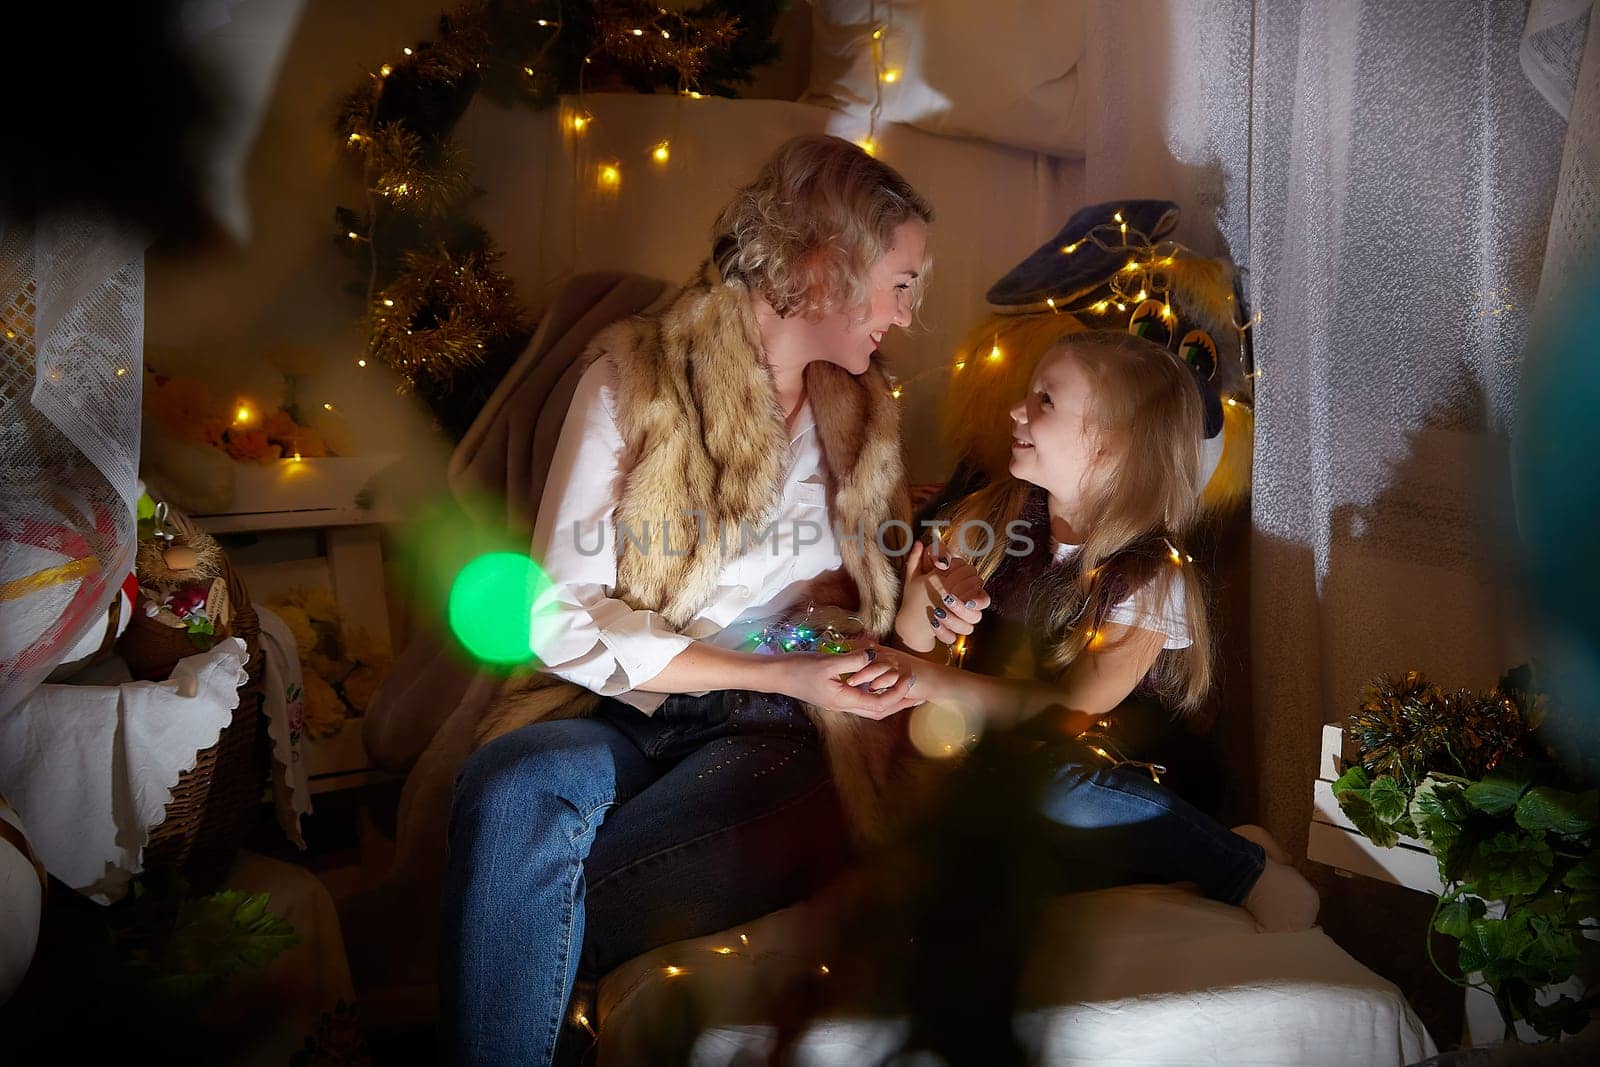 Cute mother and daughter in a room with Christmas garlands. The tradition of decorating the house and dressing up for the holidays. Gifts for the family. Happy childhood and motherhood by keleny